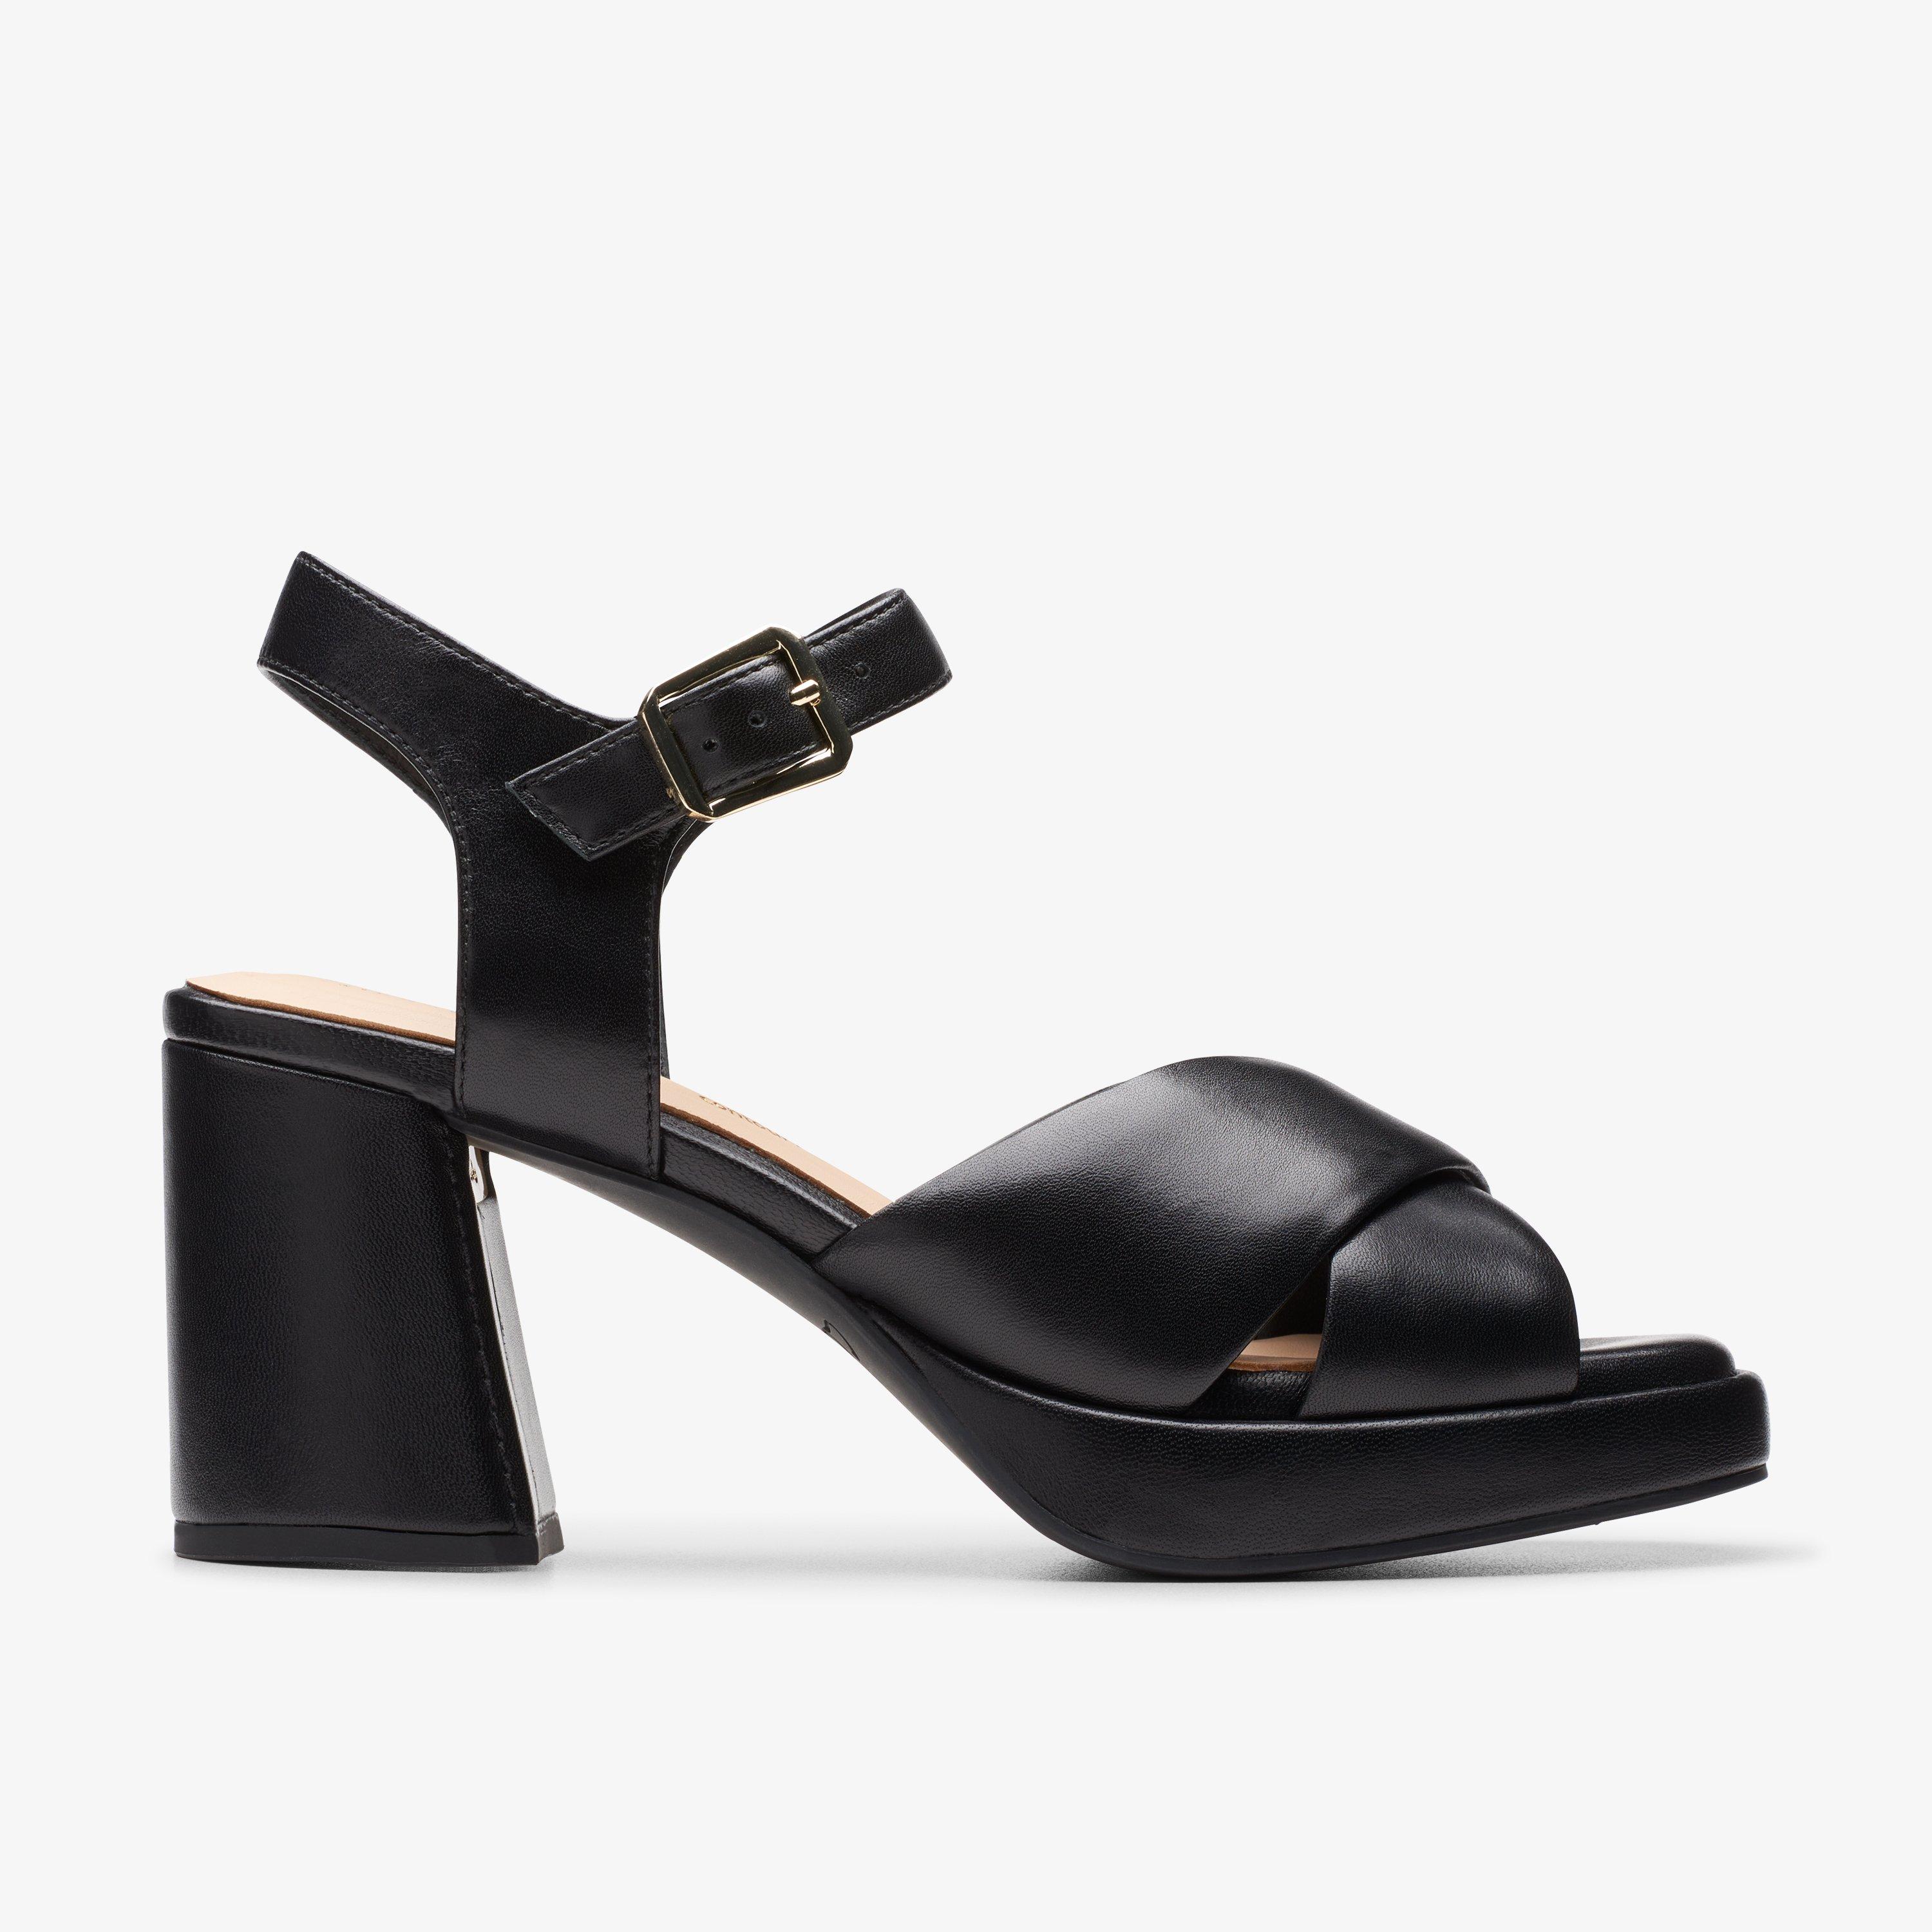 Women's Sandals - Flat, Heeled, Strappy & Leather